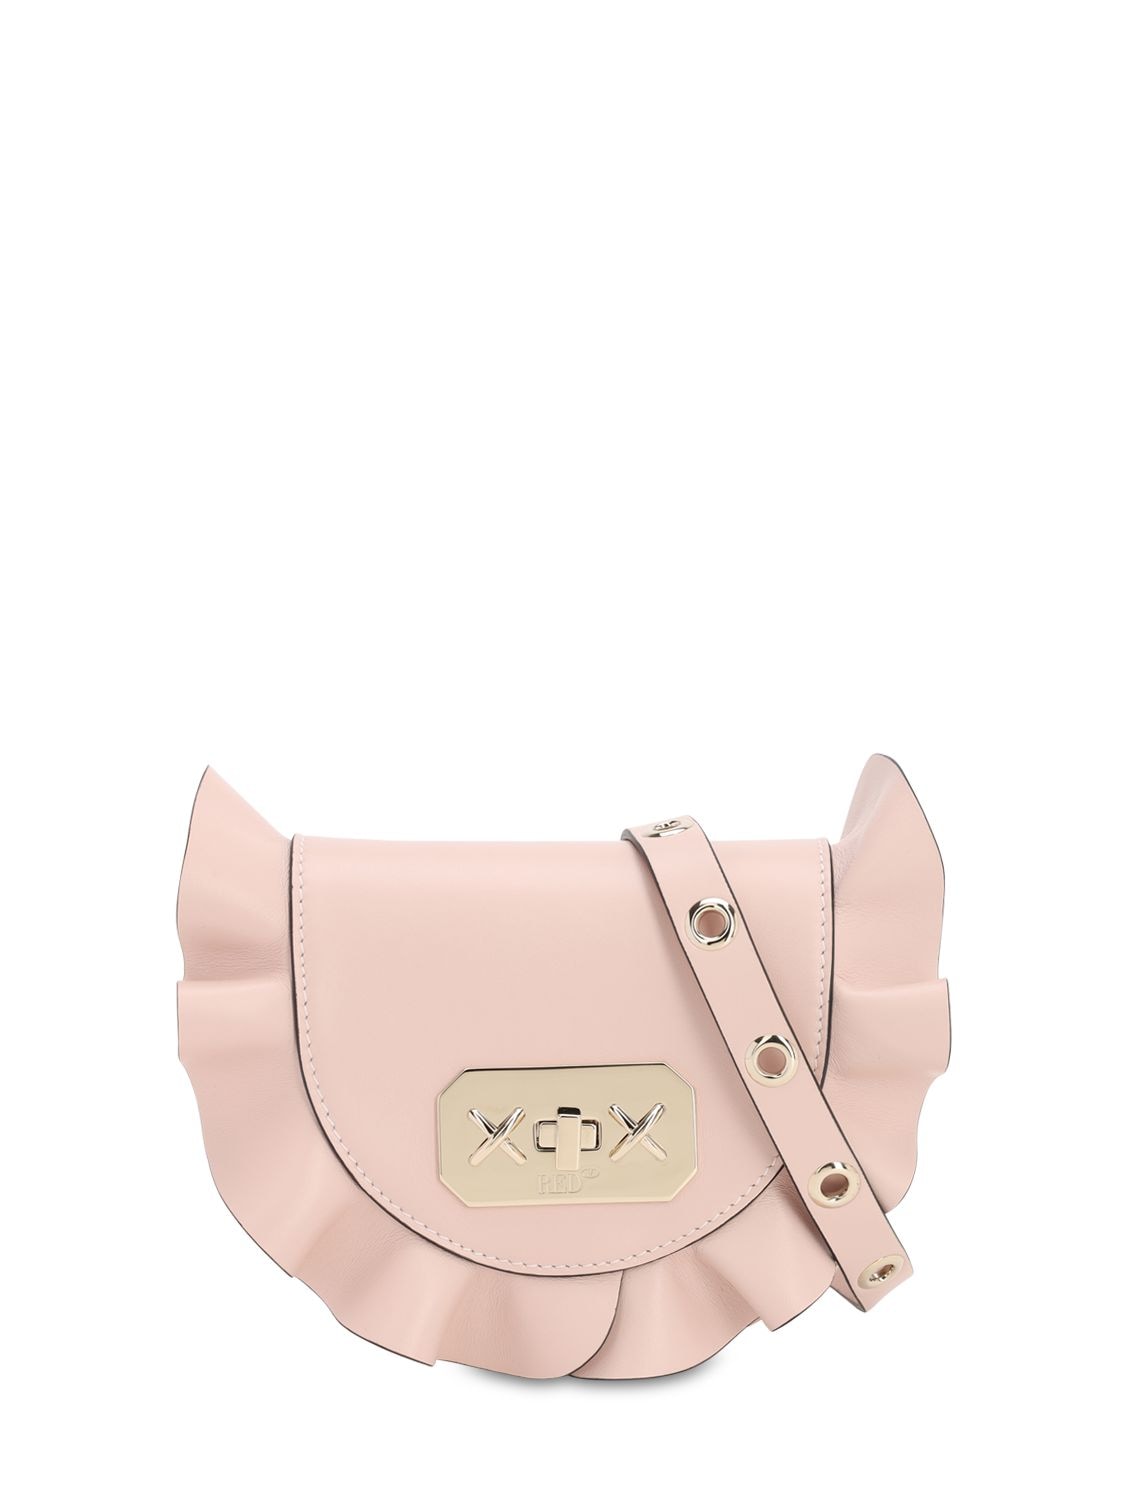 Red Valentino Audrey Leather Shoulder Bag In Nude